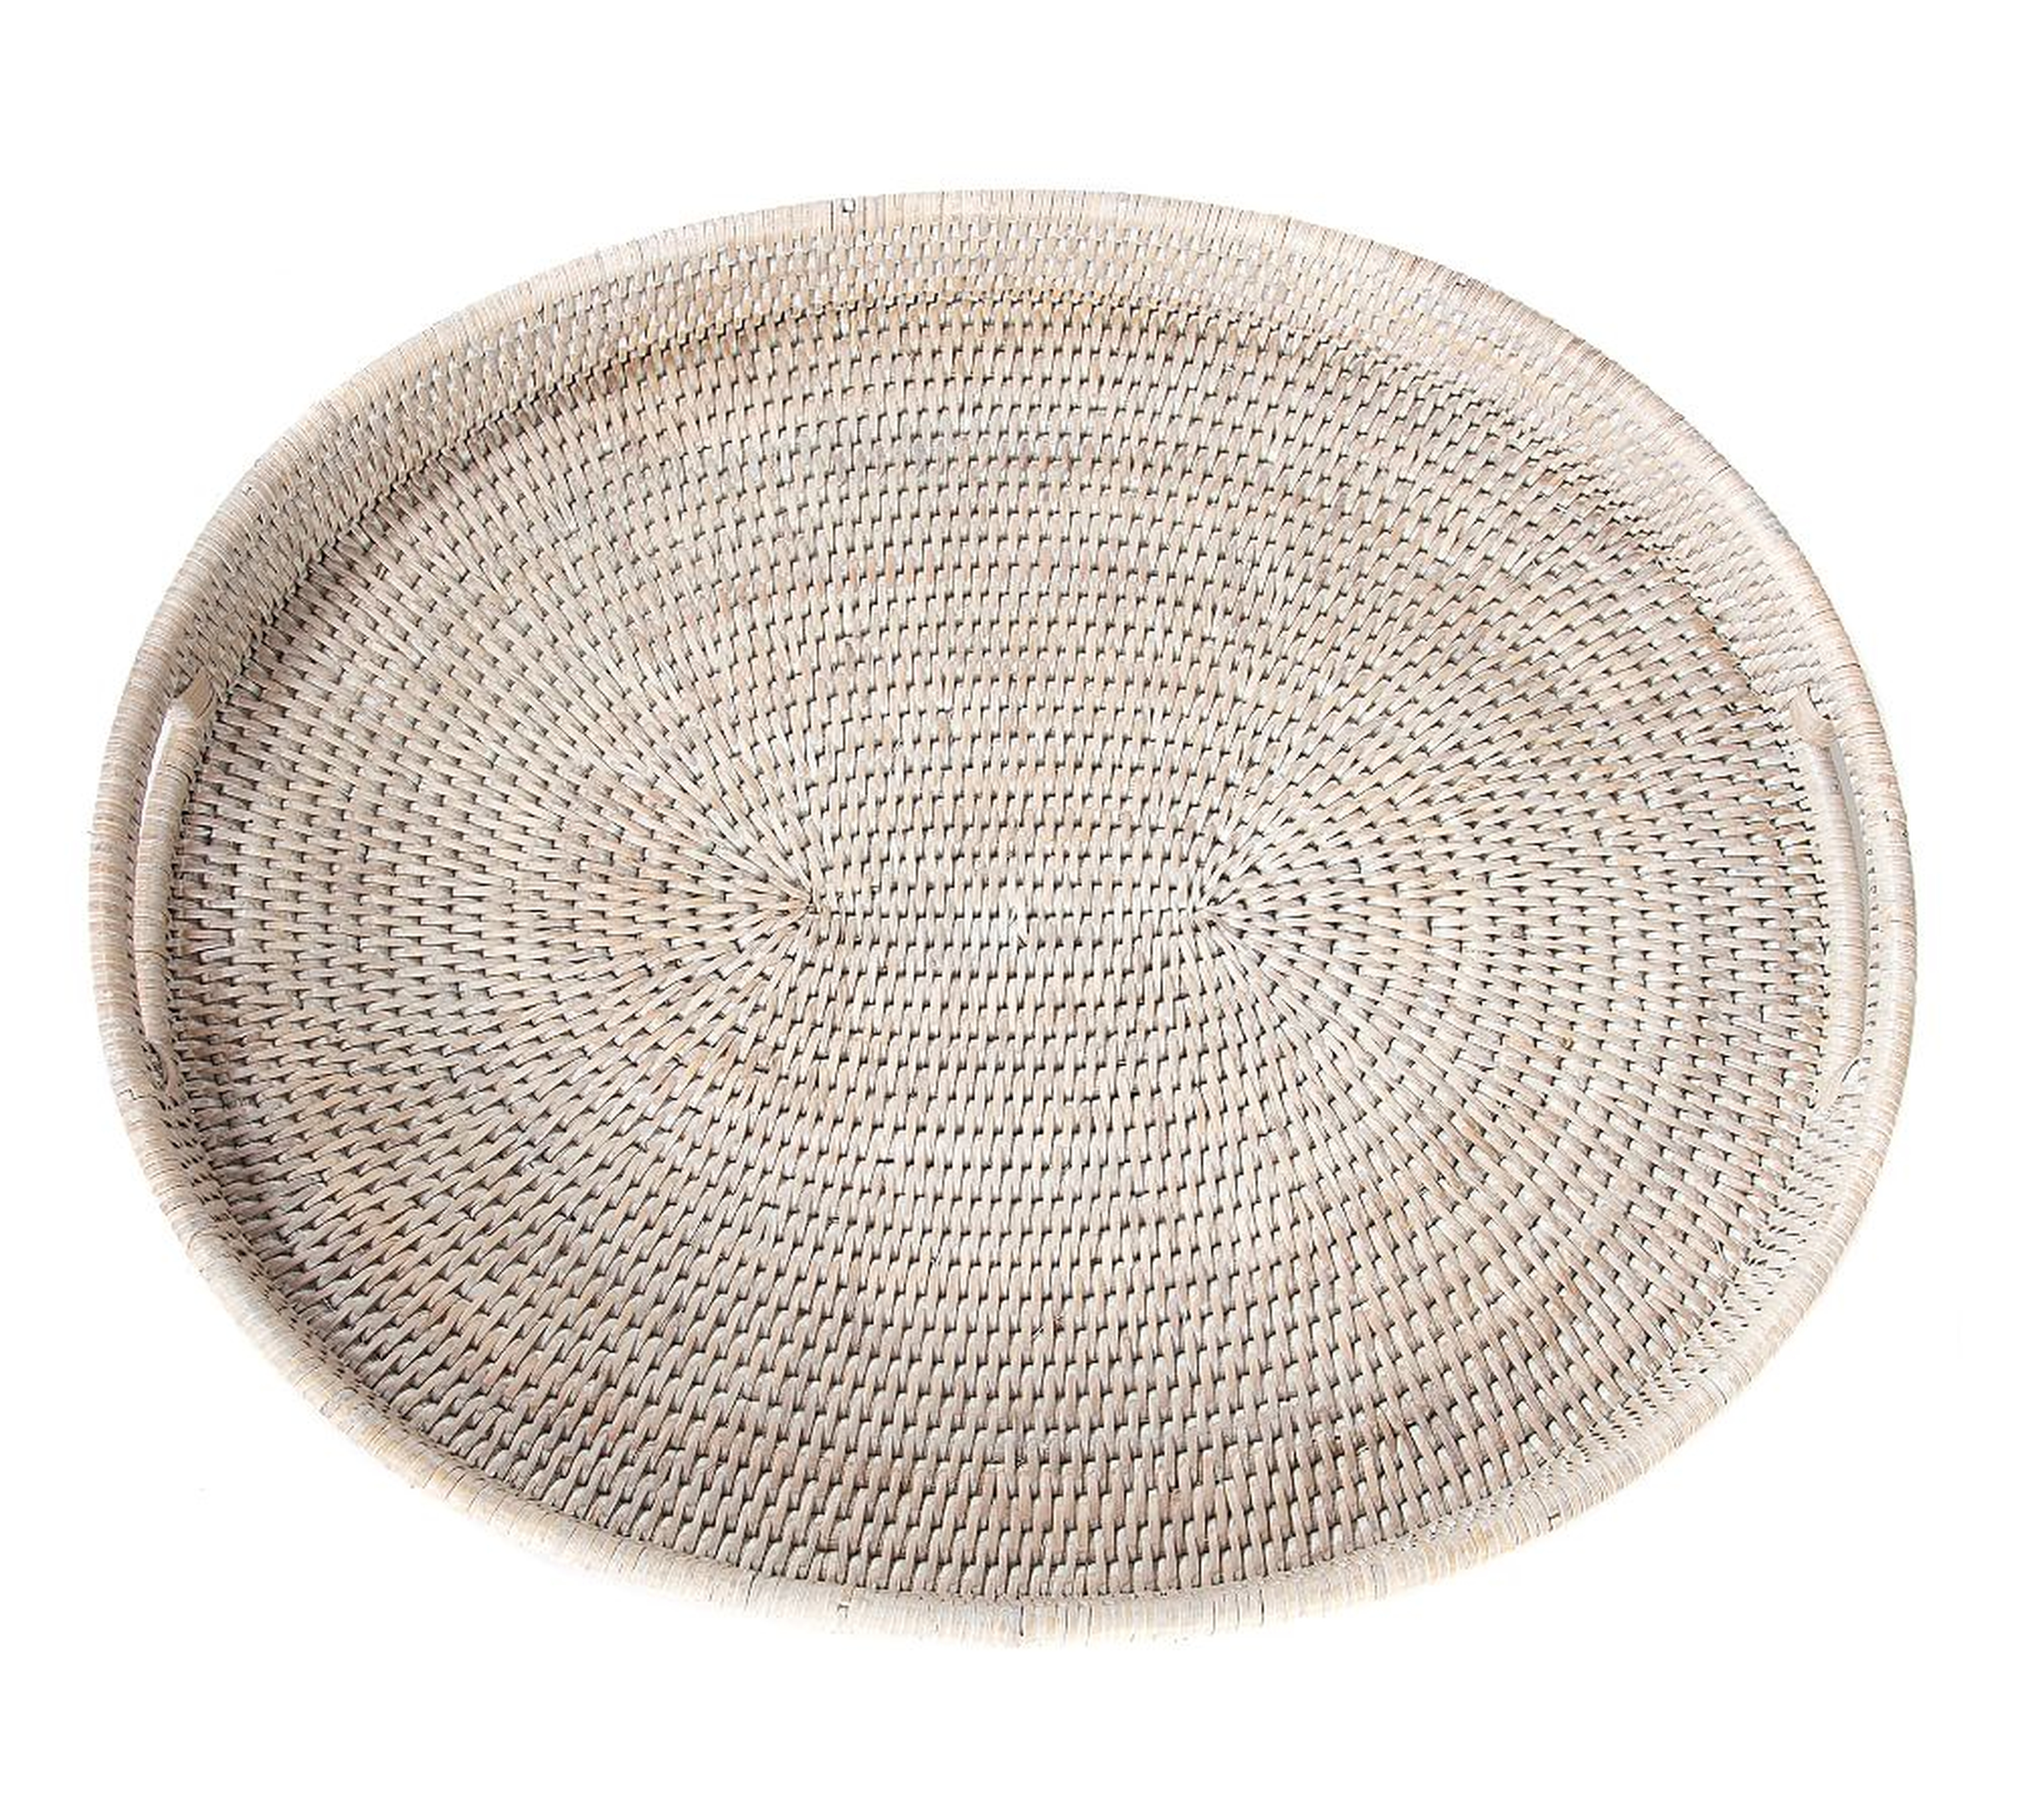 Tava Handwoven Rattan Oval Serving Tray, 18"W, White Wash - Pottery Barn